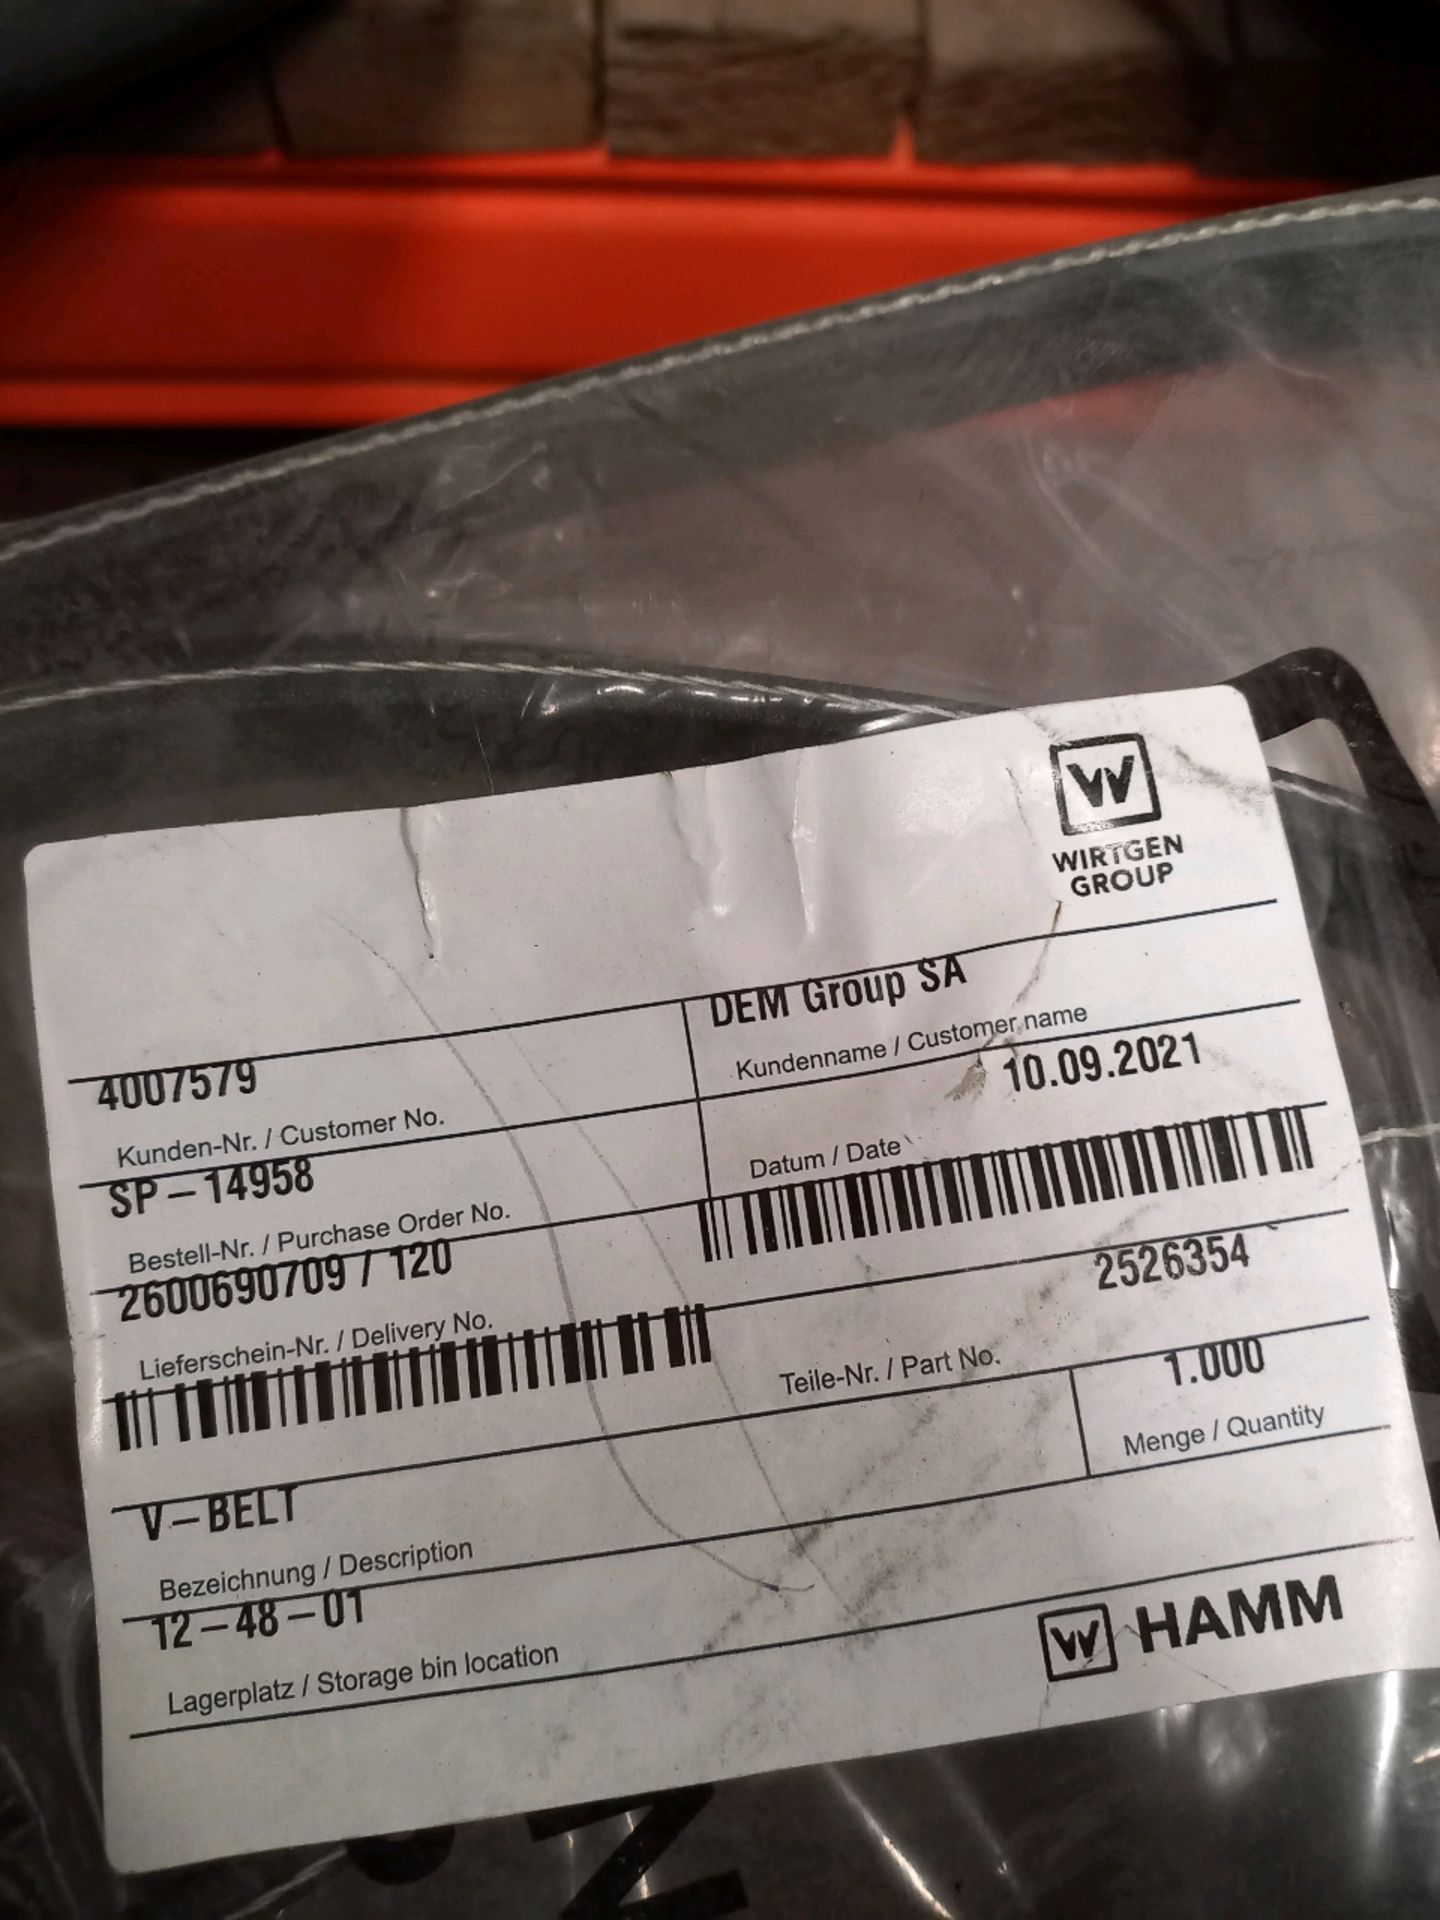 HAMM Spares - Image 43 of 98